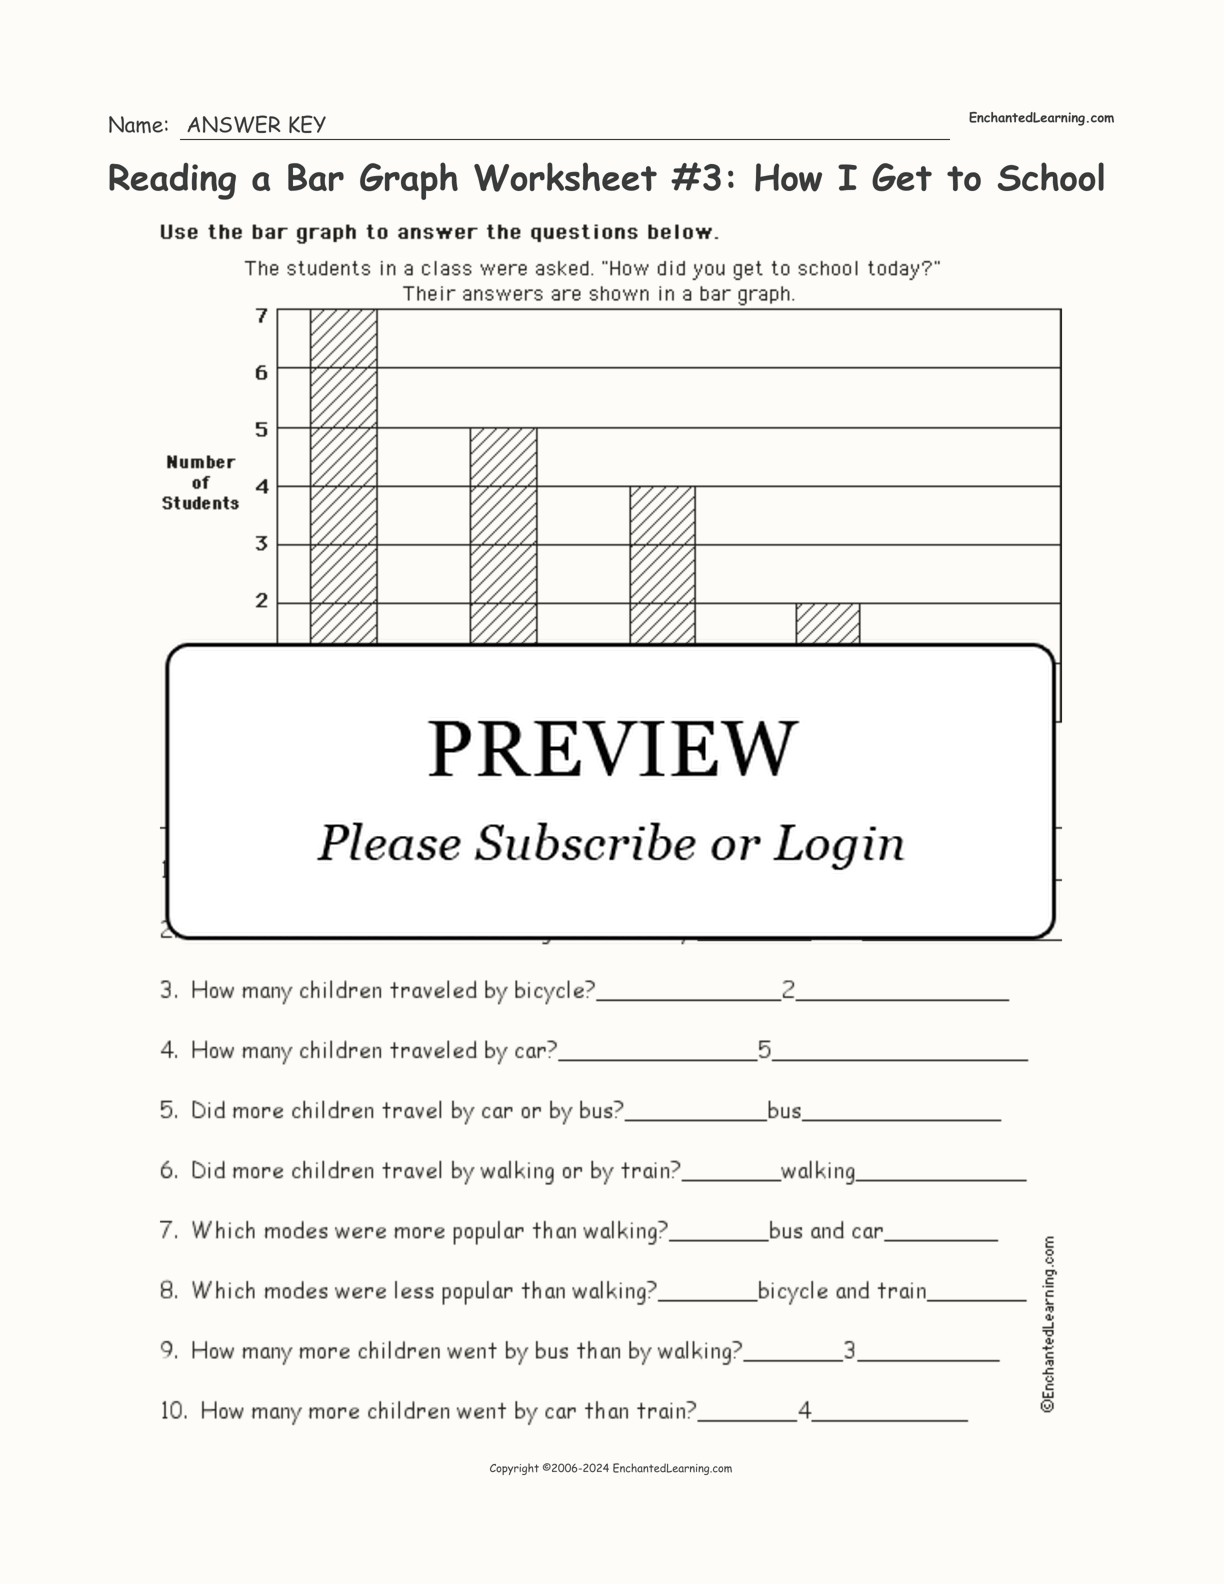 Reading a Bar Graph Worksheet #3: How I Get to School interactive worksheet page 2